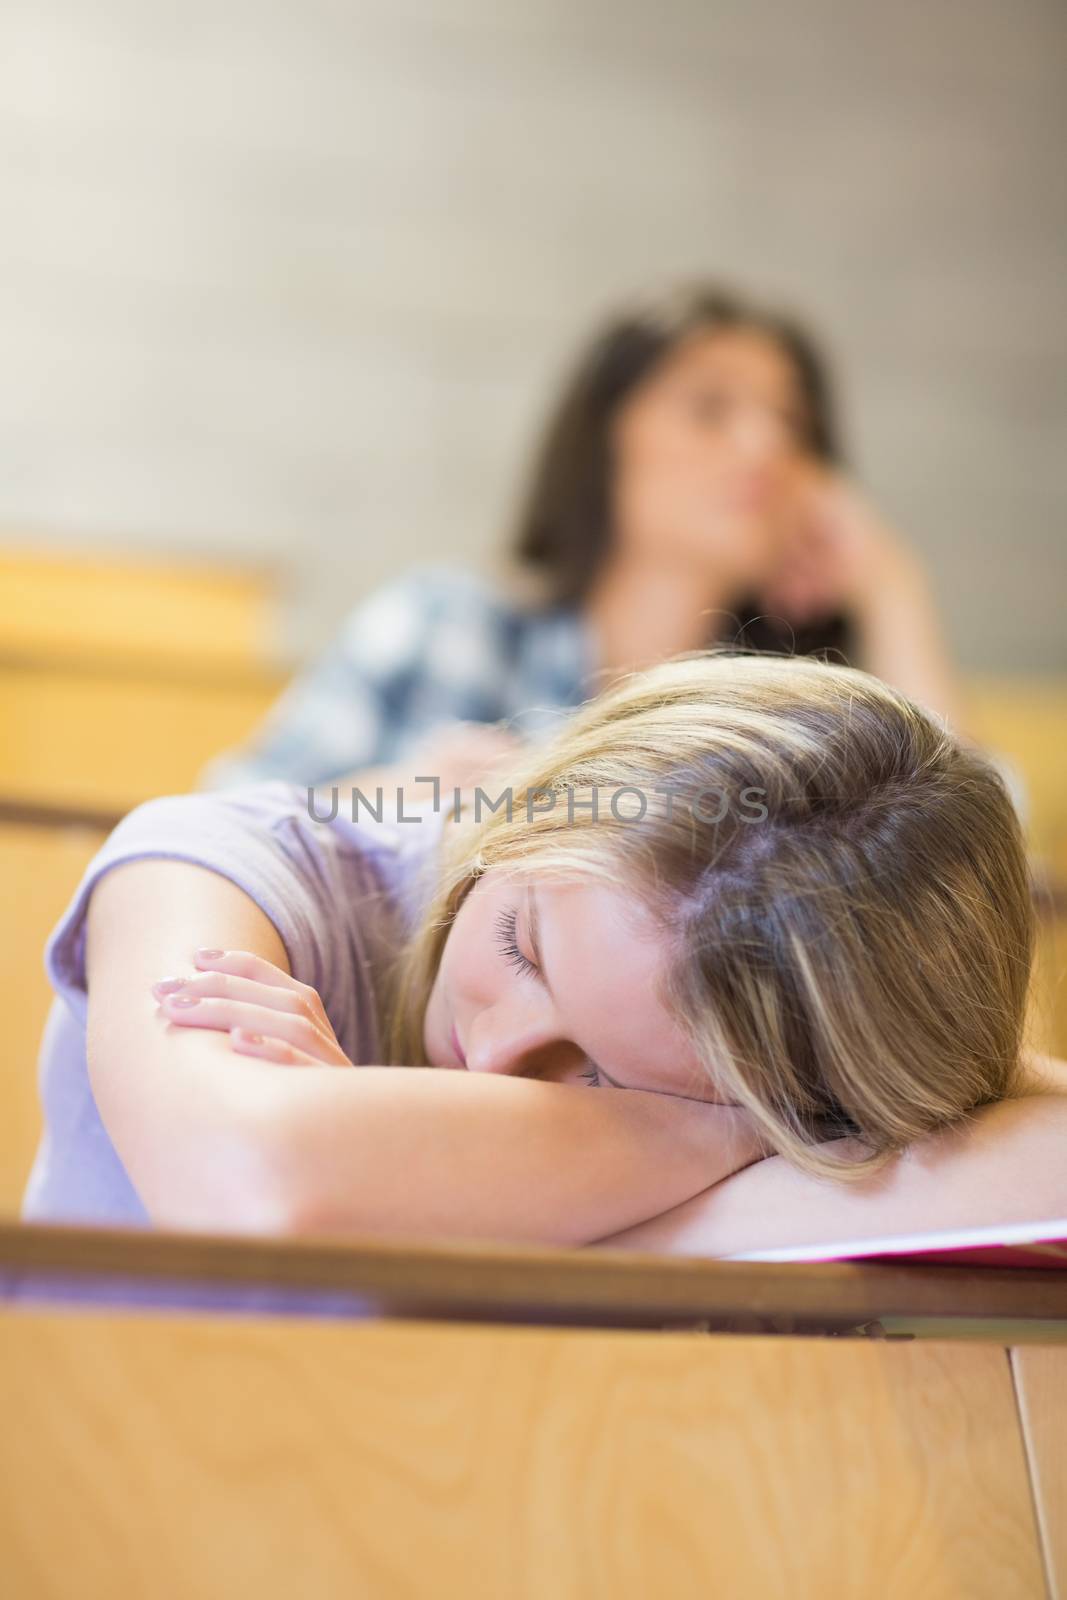 Bored student listening while classmate sleeping in university